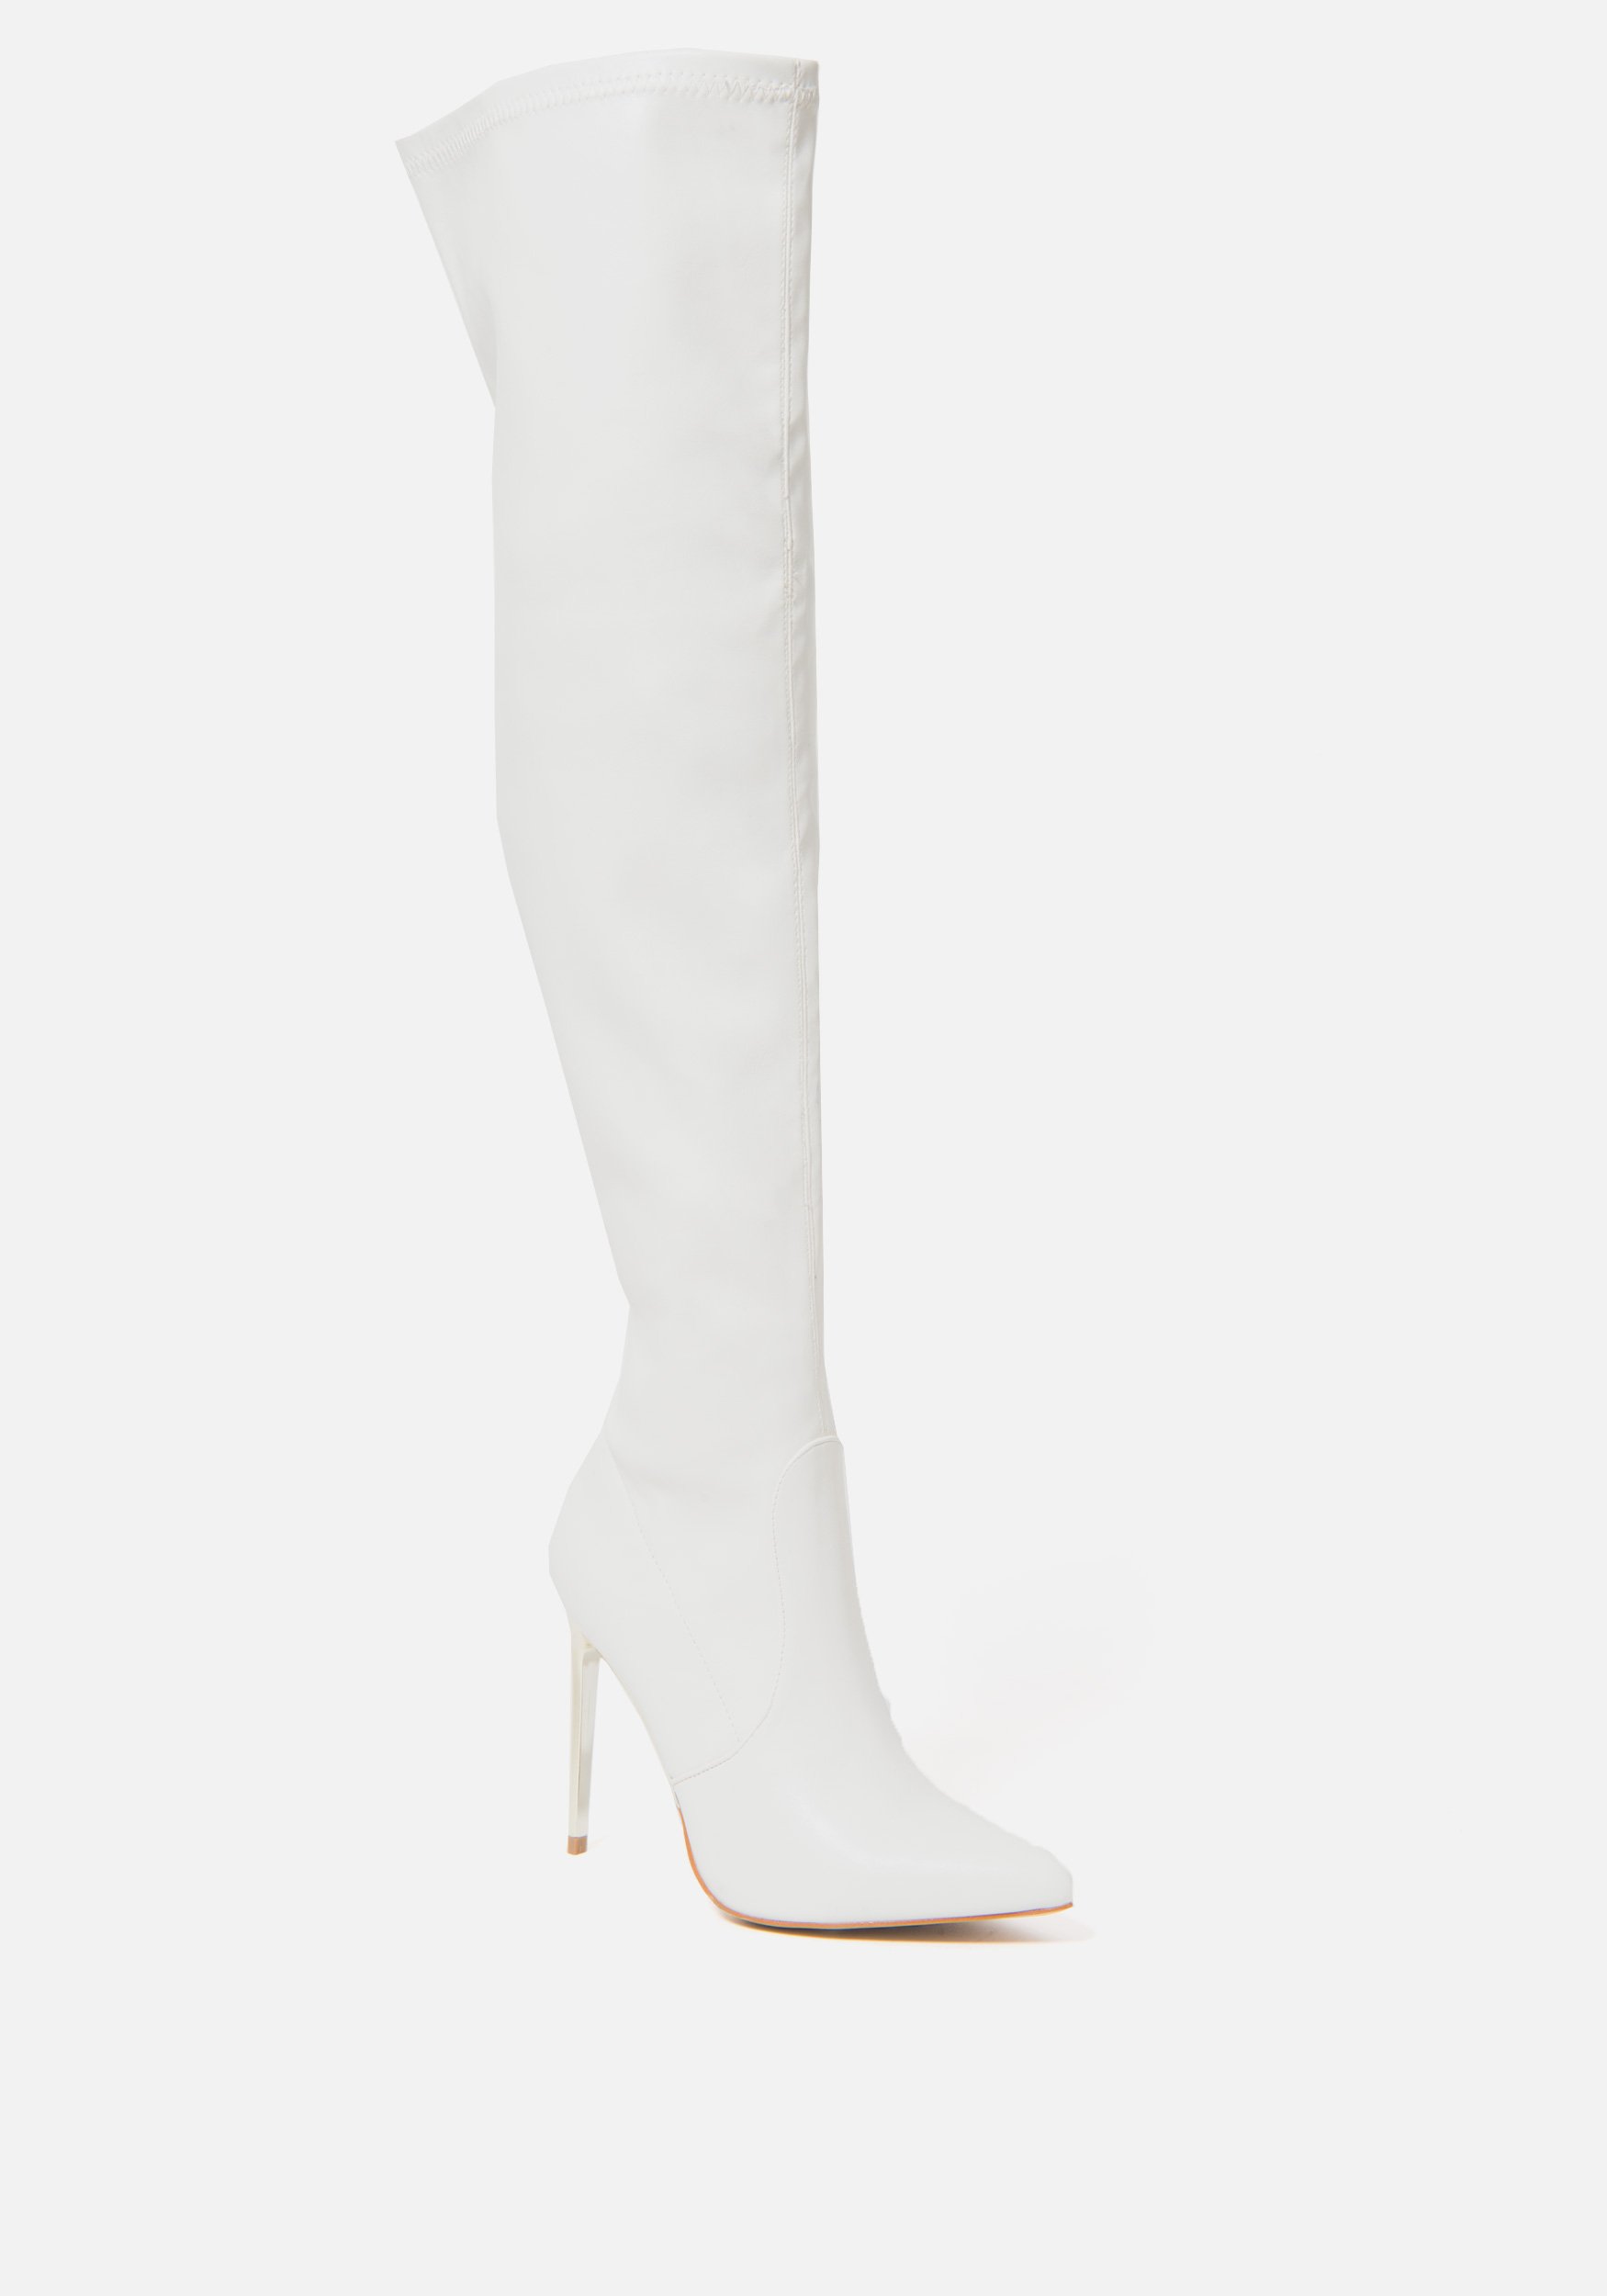 Bebe Women's Valirya Over the Knee Boots, Size 10 in WINTER WHITE Synthetic